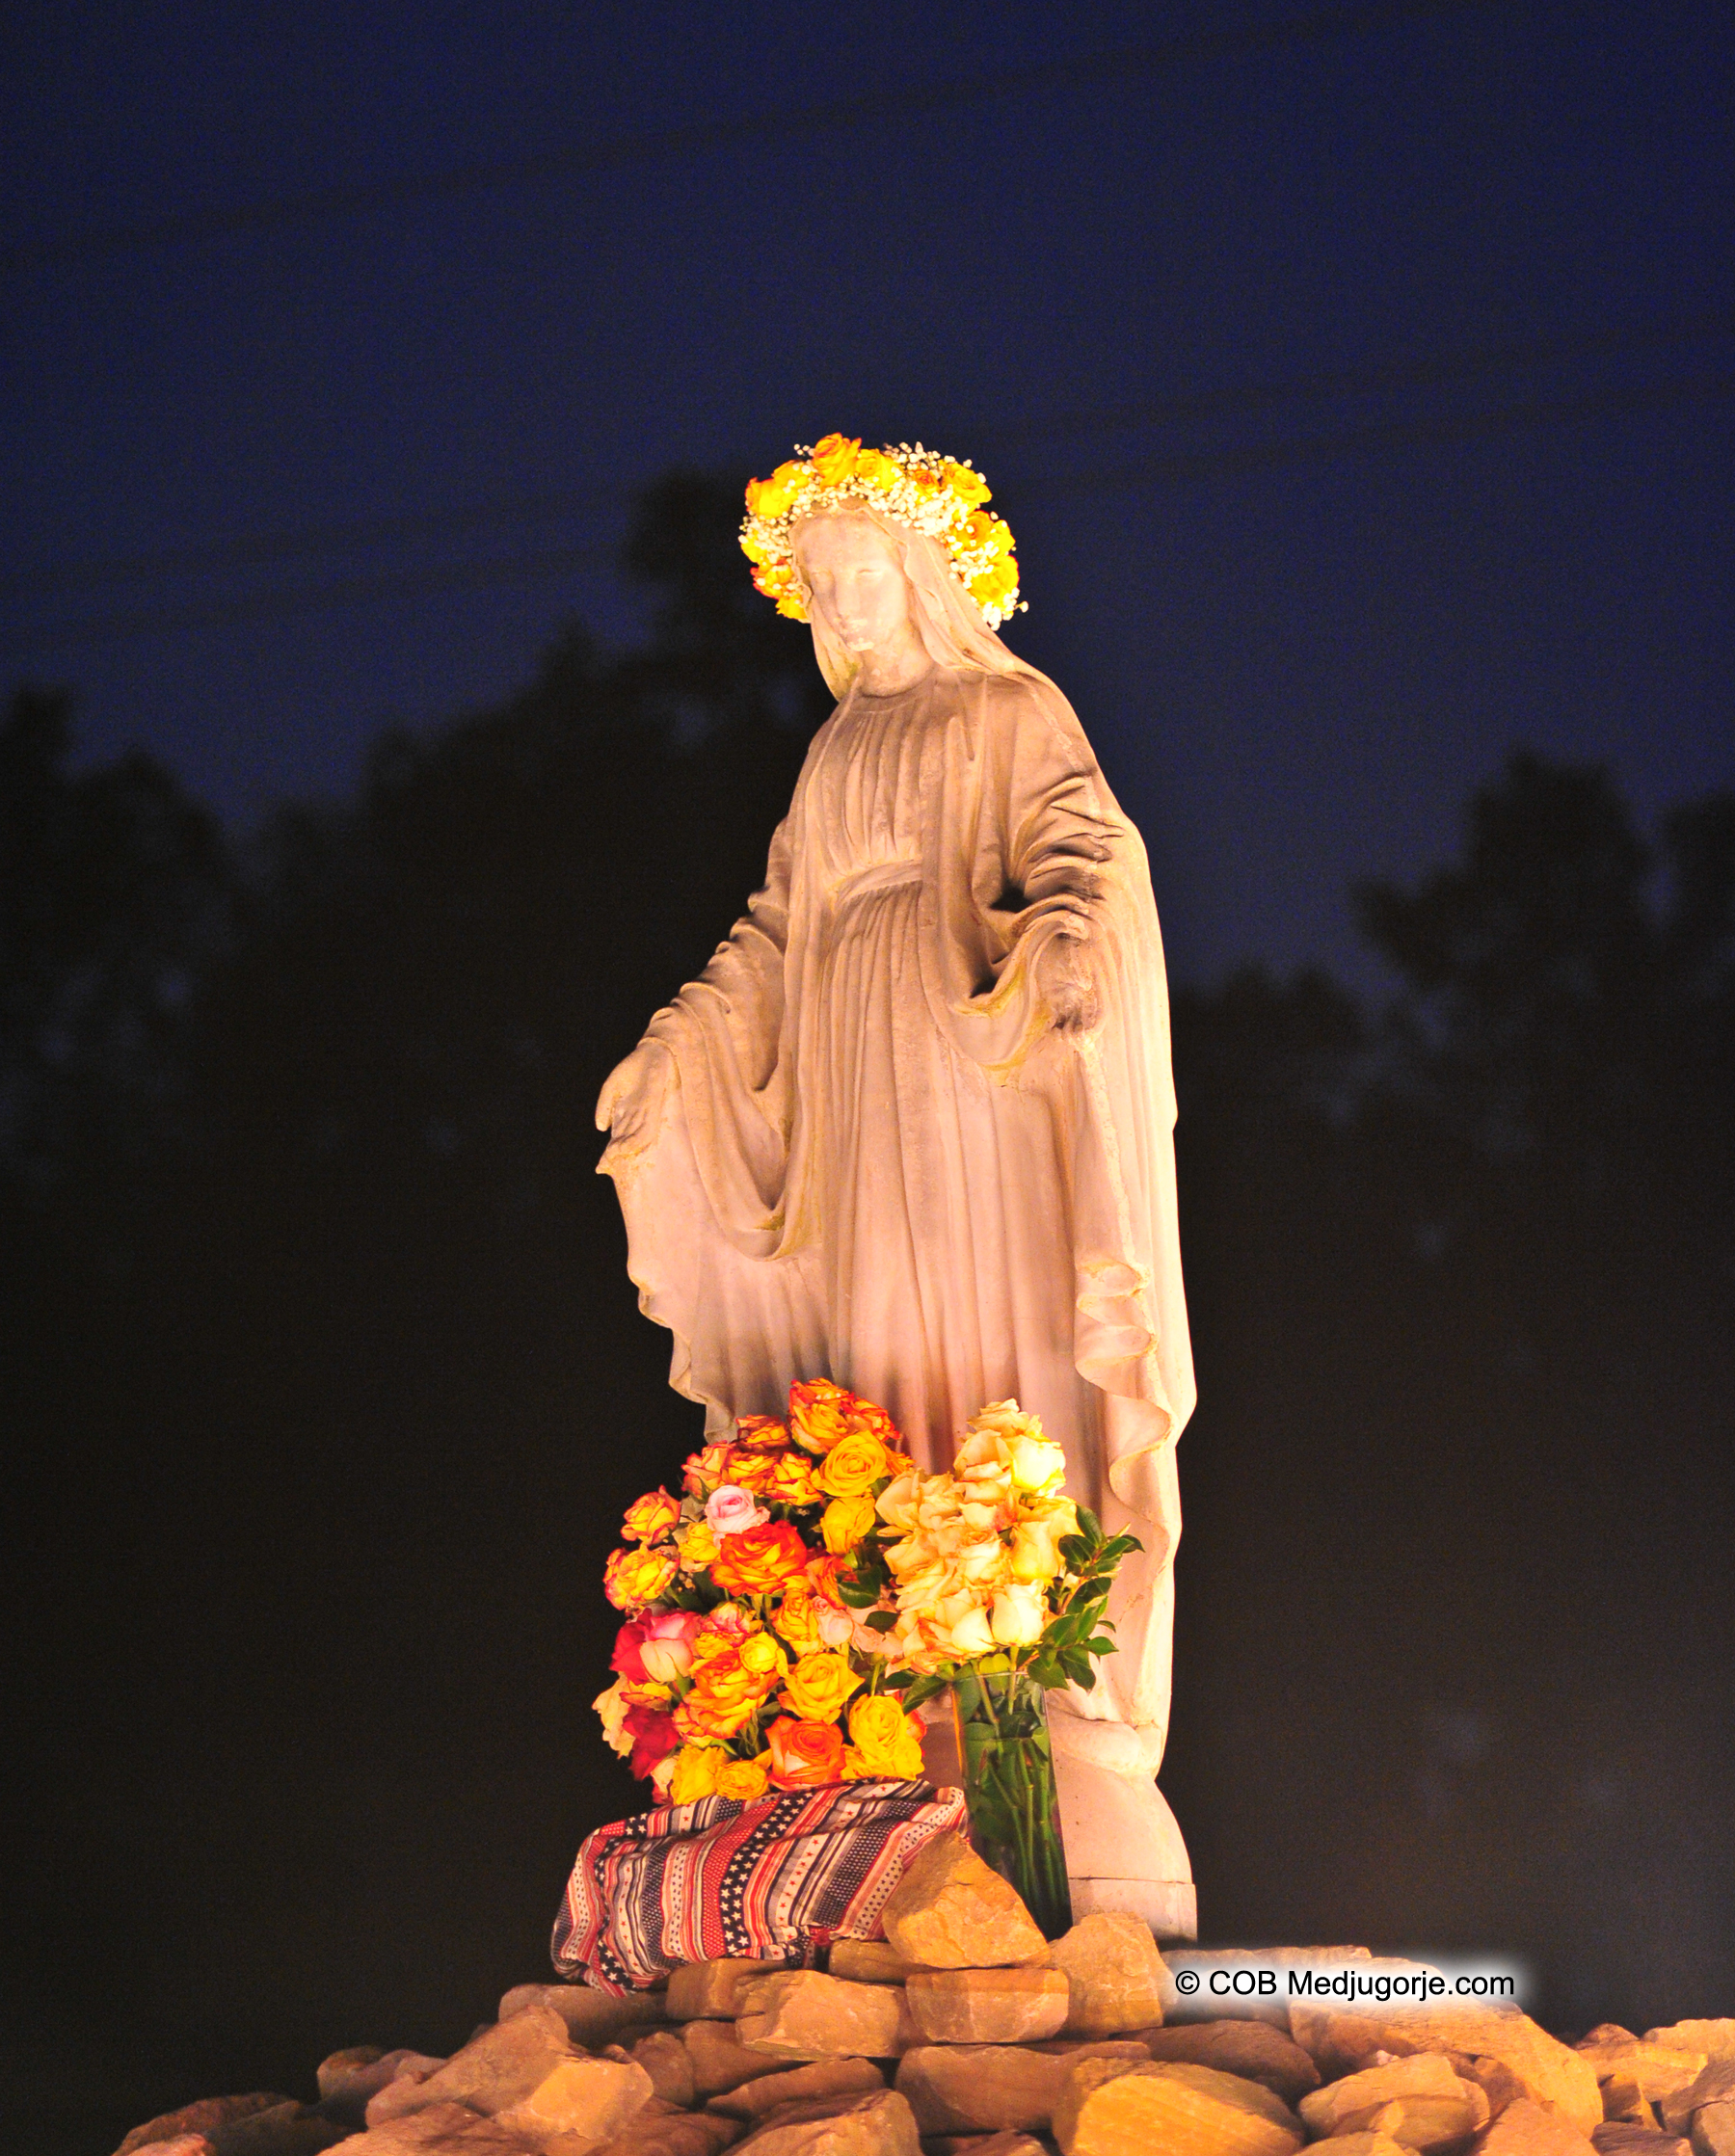 Statue of Our Lady in the Field July 4, 2012